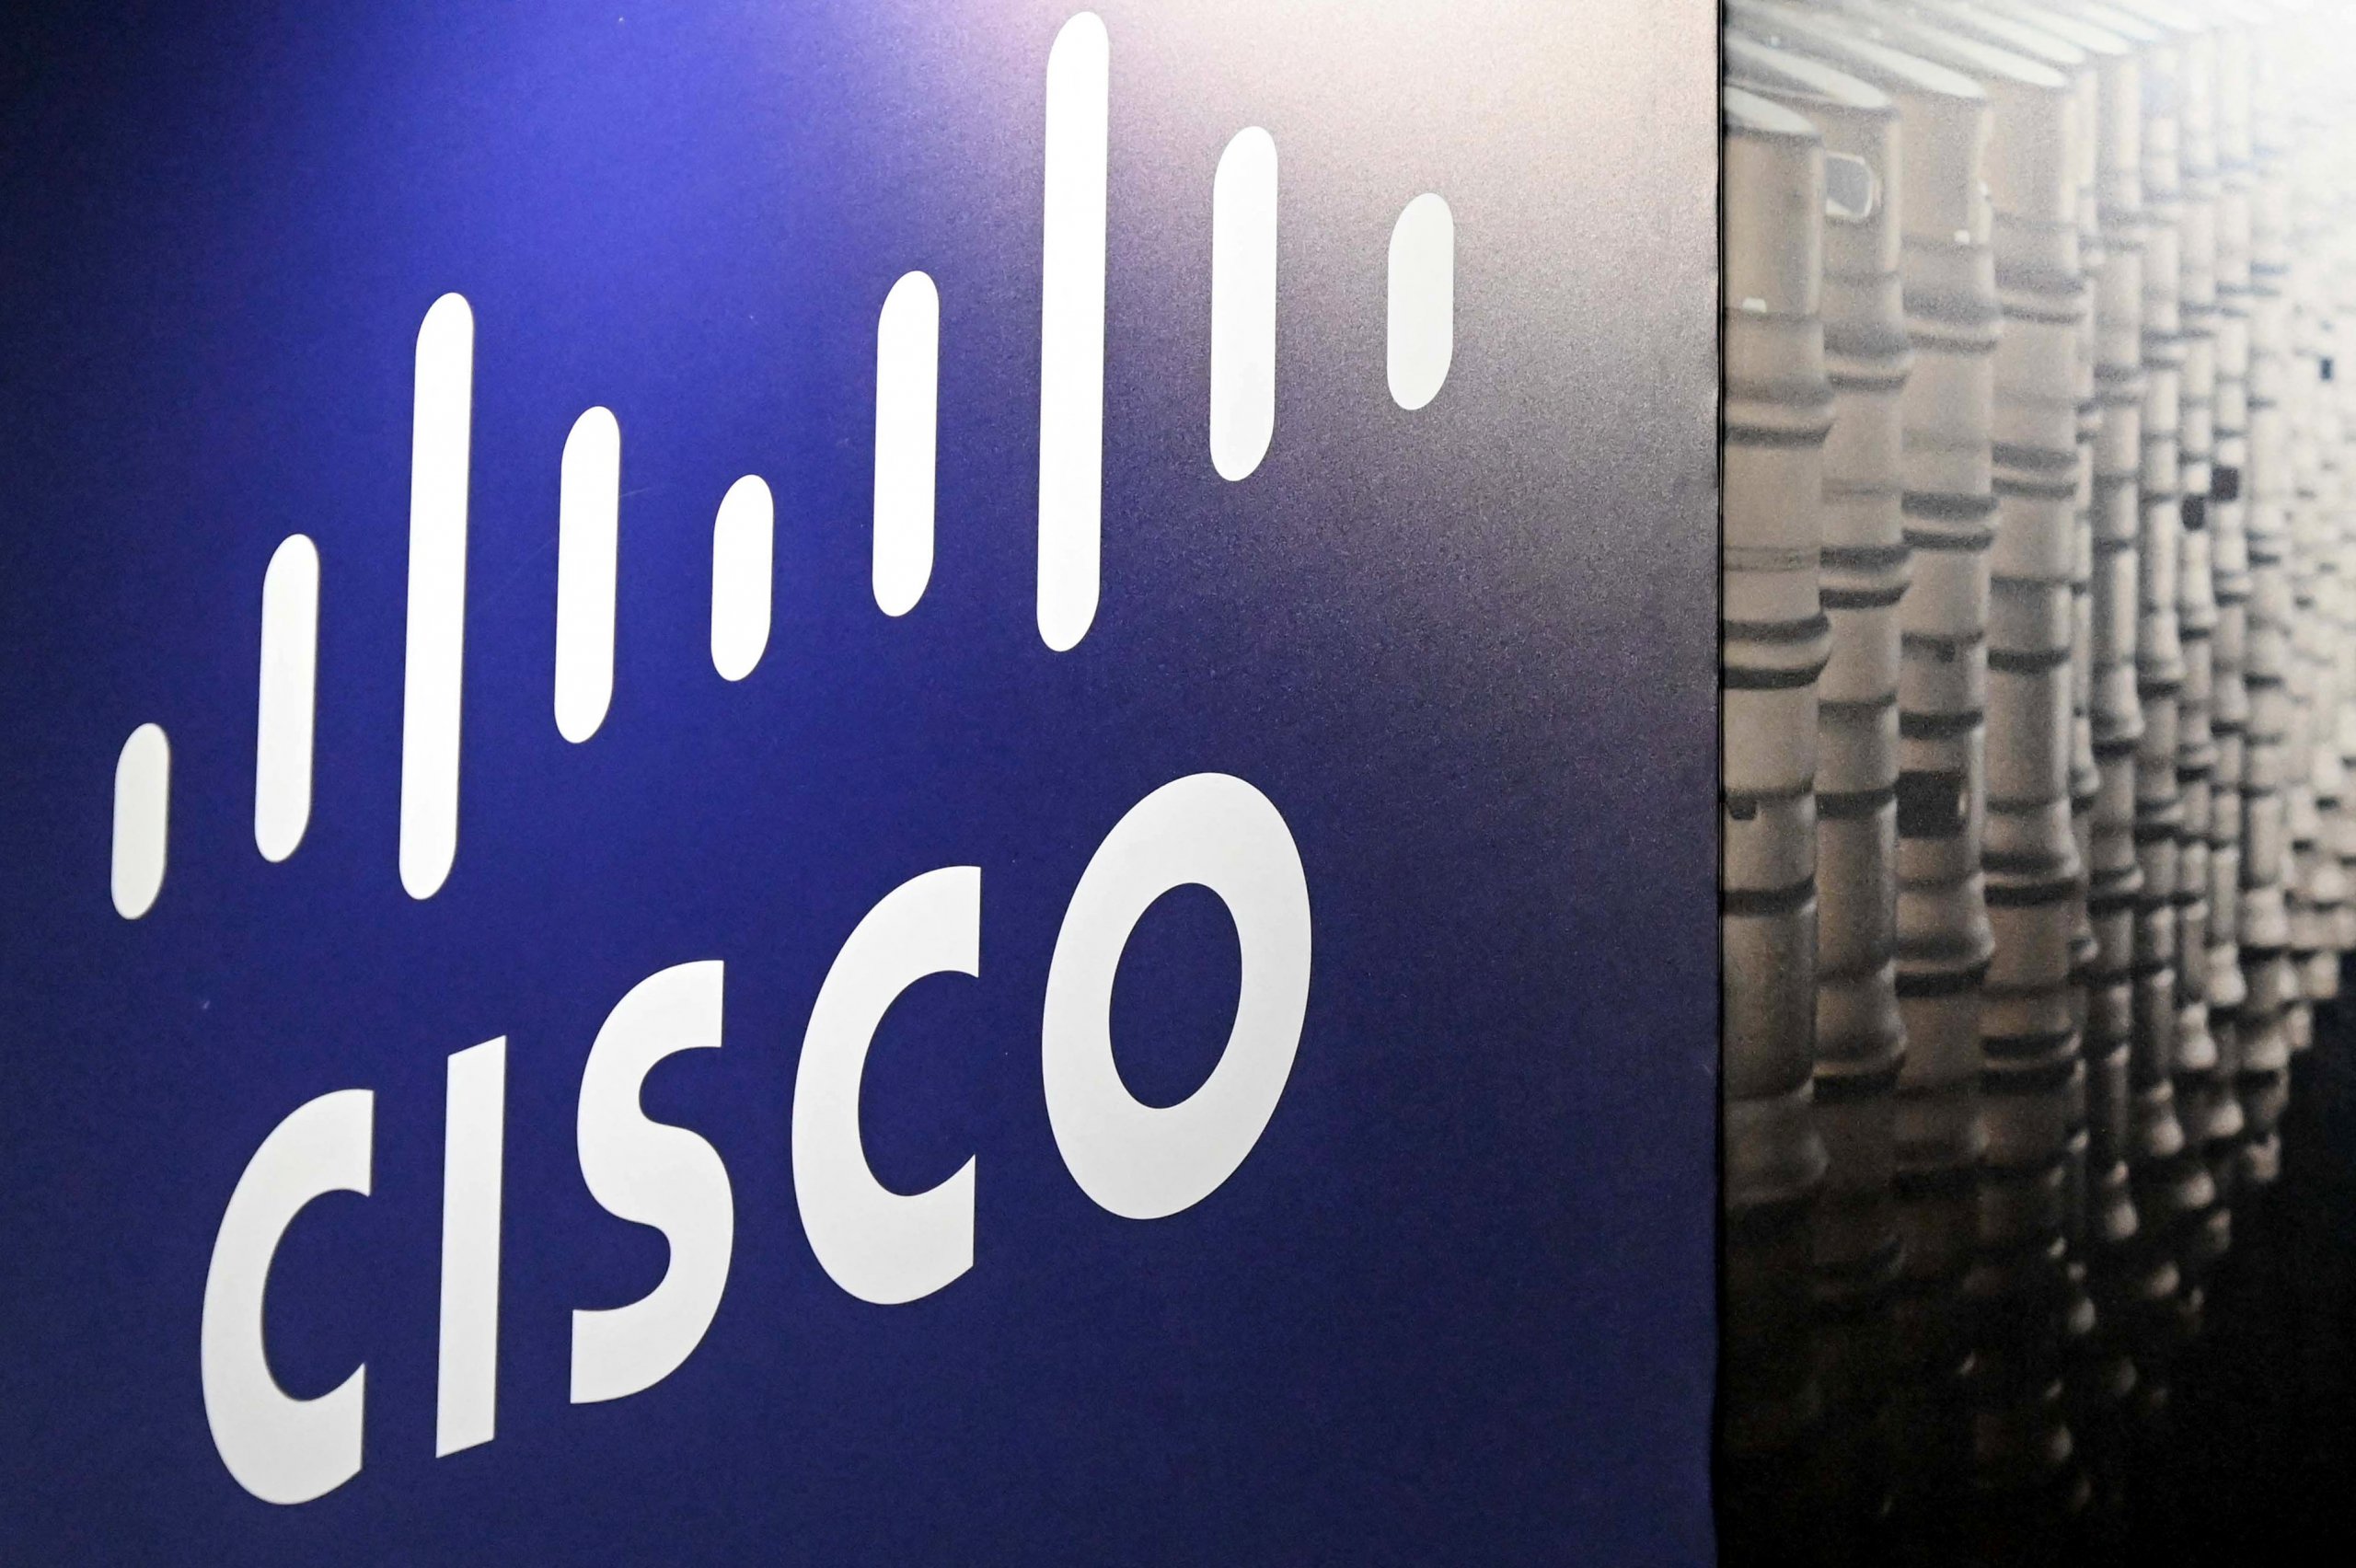 Cisco: Employee’s credentials compromised by sophisticated voice phishing attacks